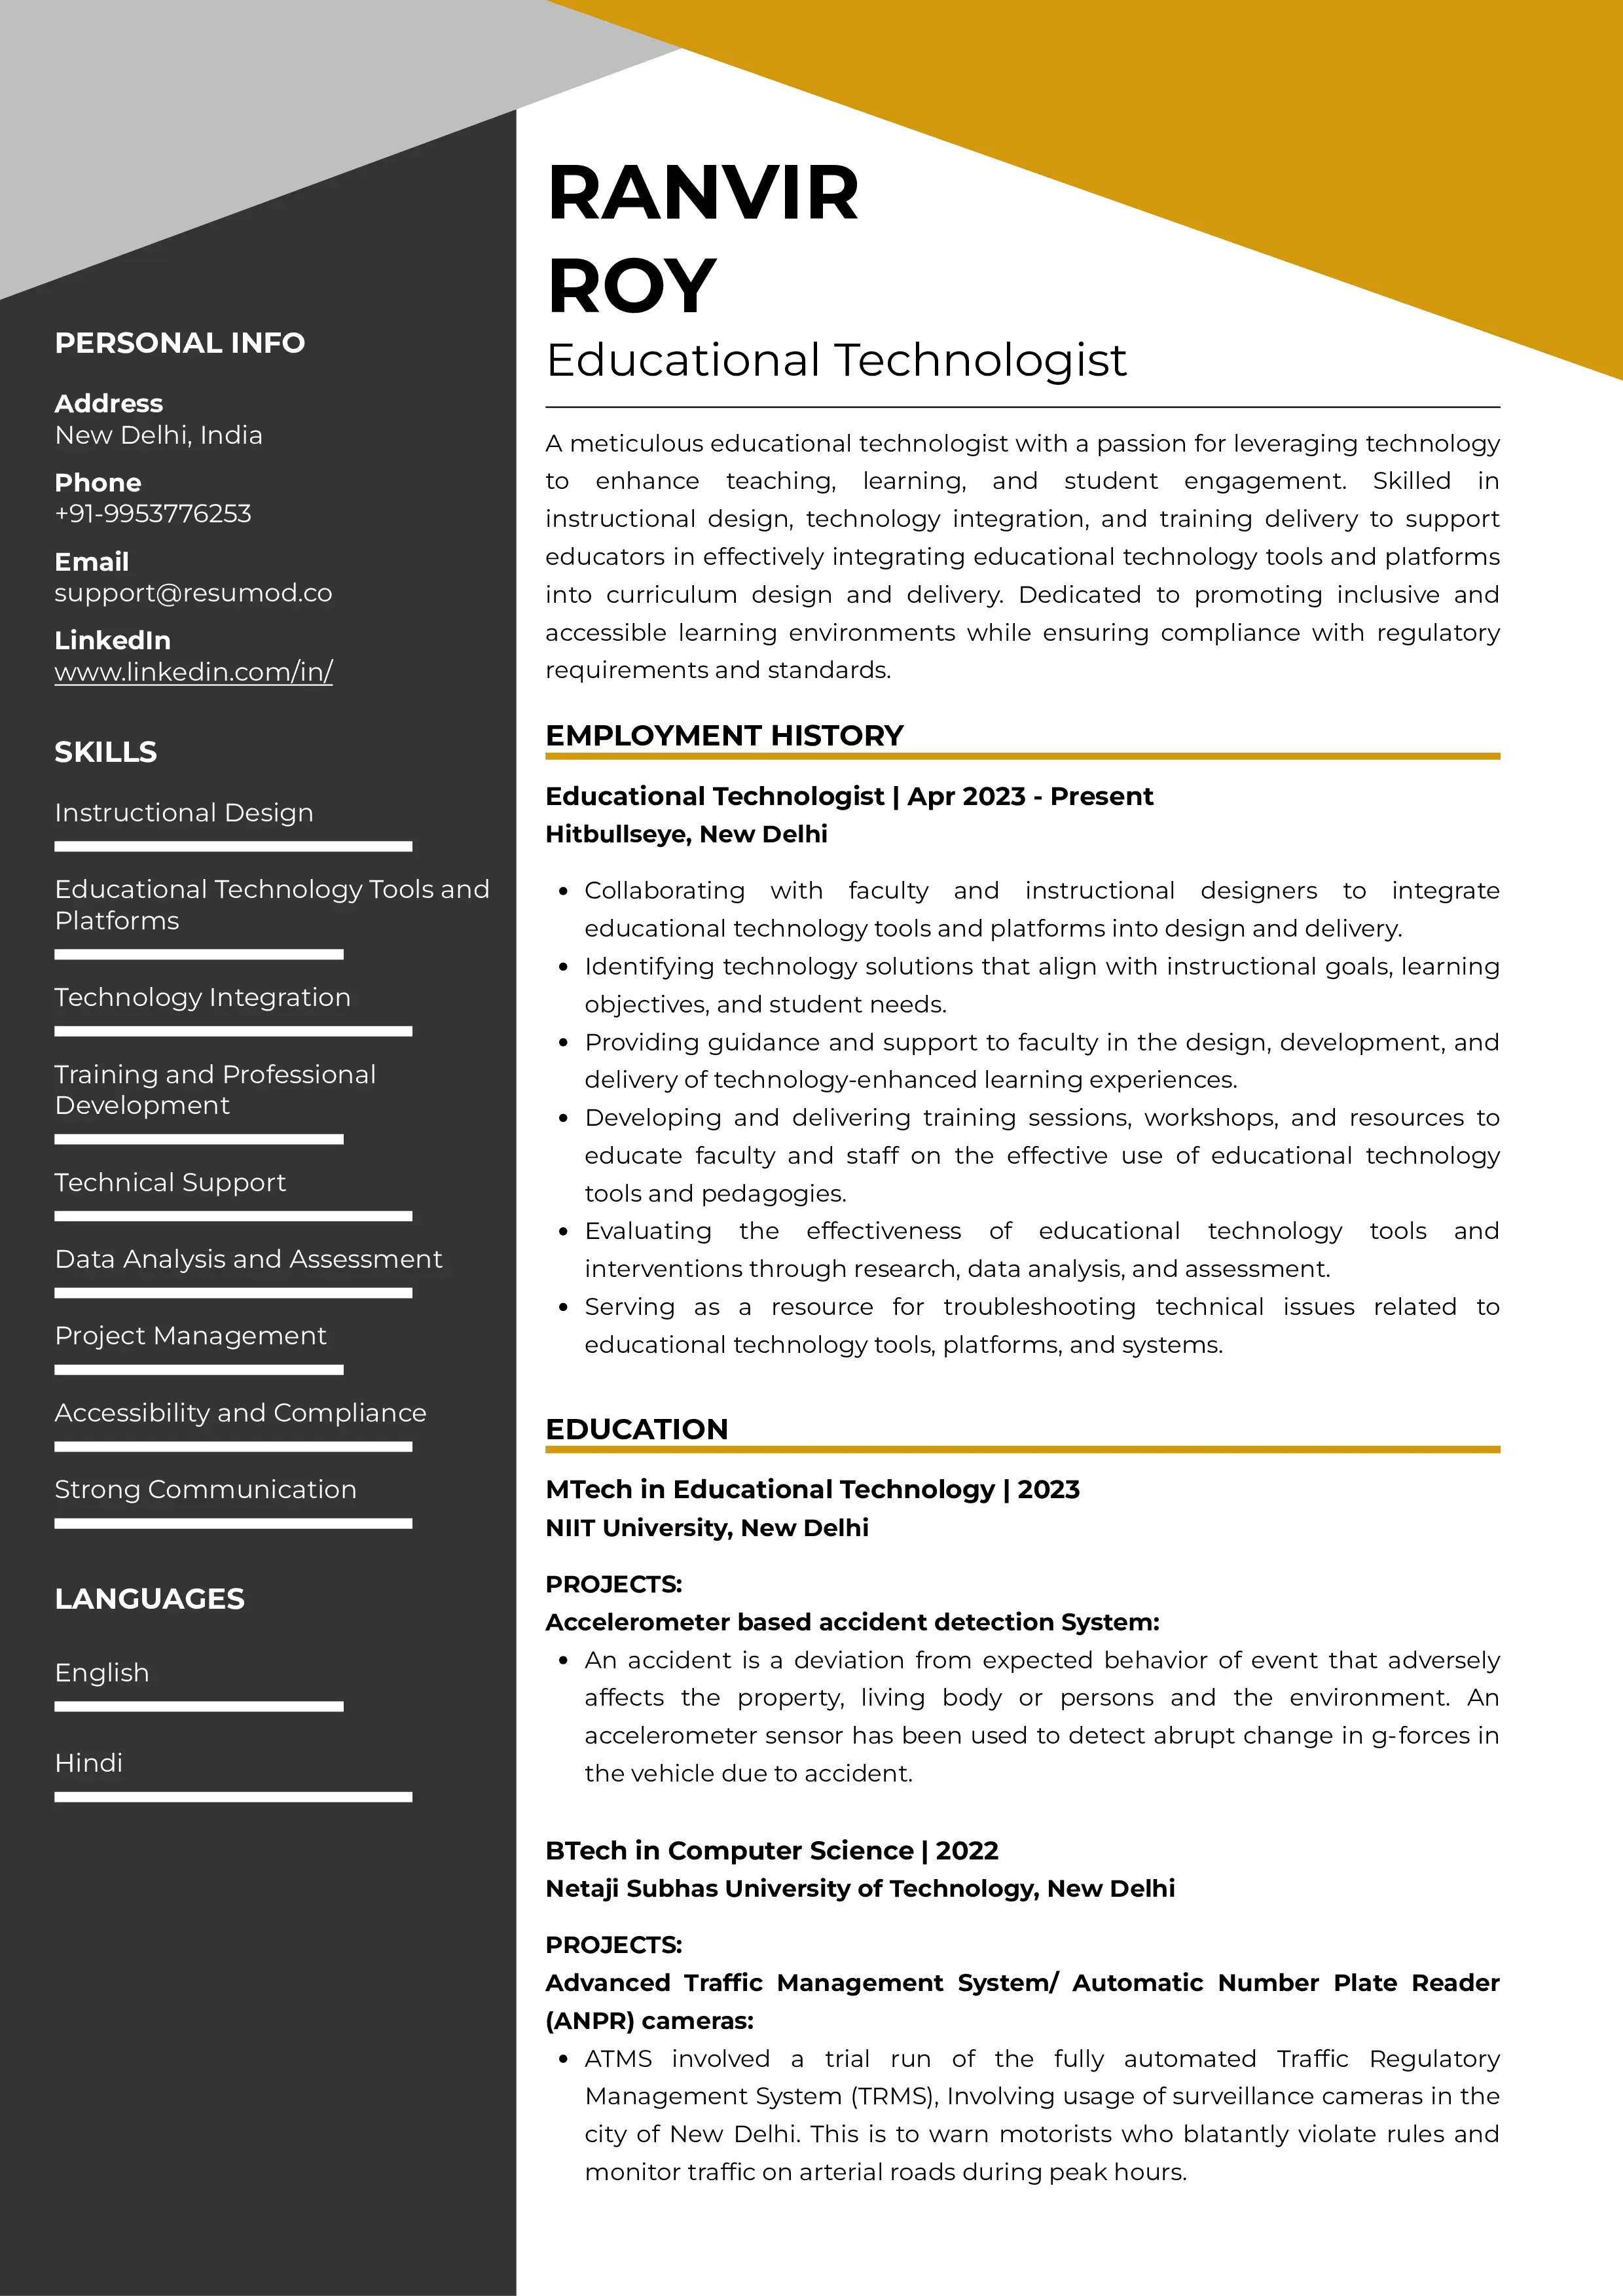 Sample Resume of Educational Technologist | Free Resume Templates & Samples on Resumod.co